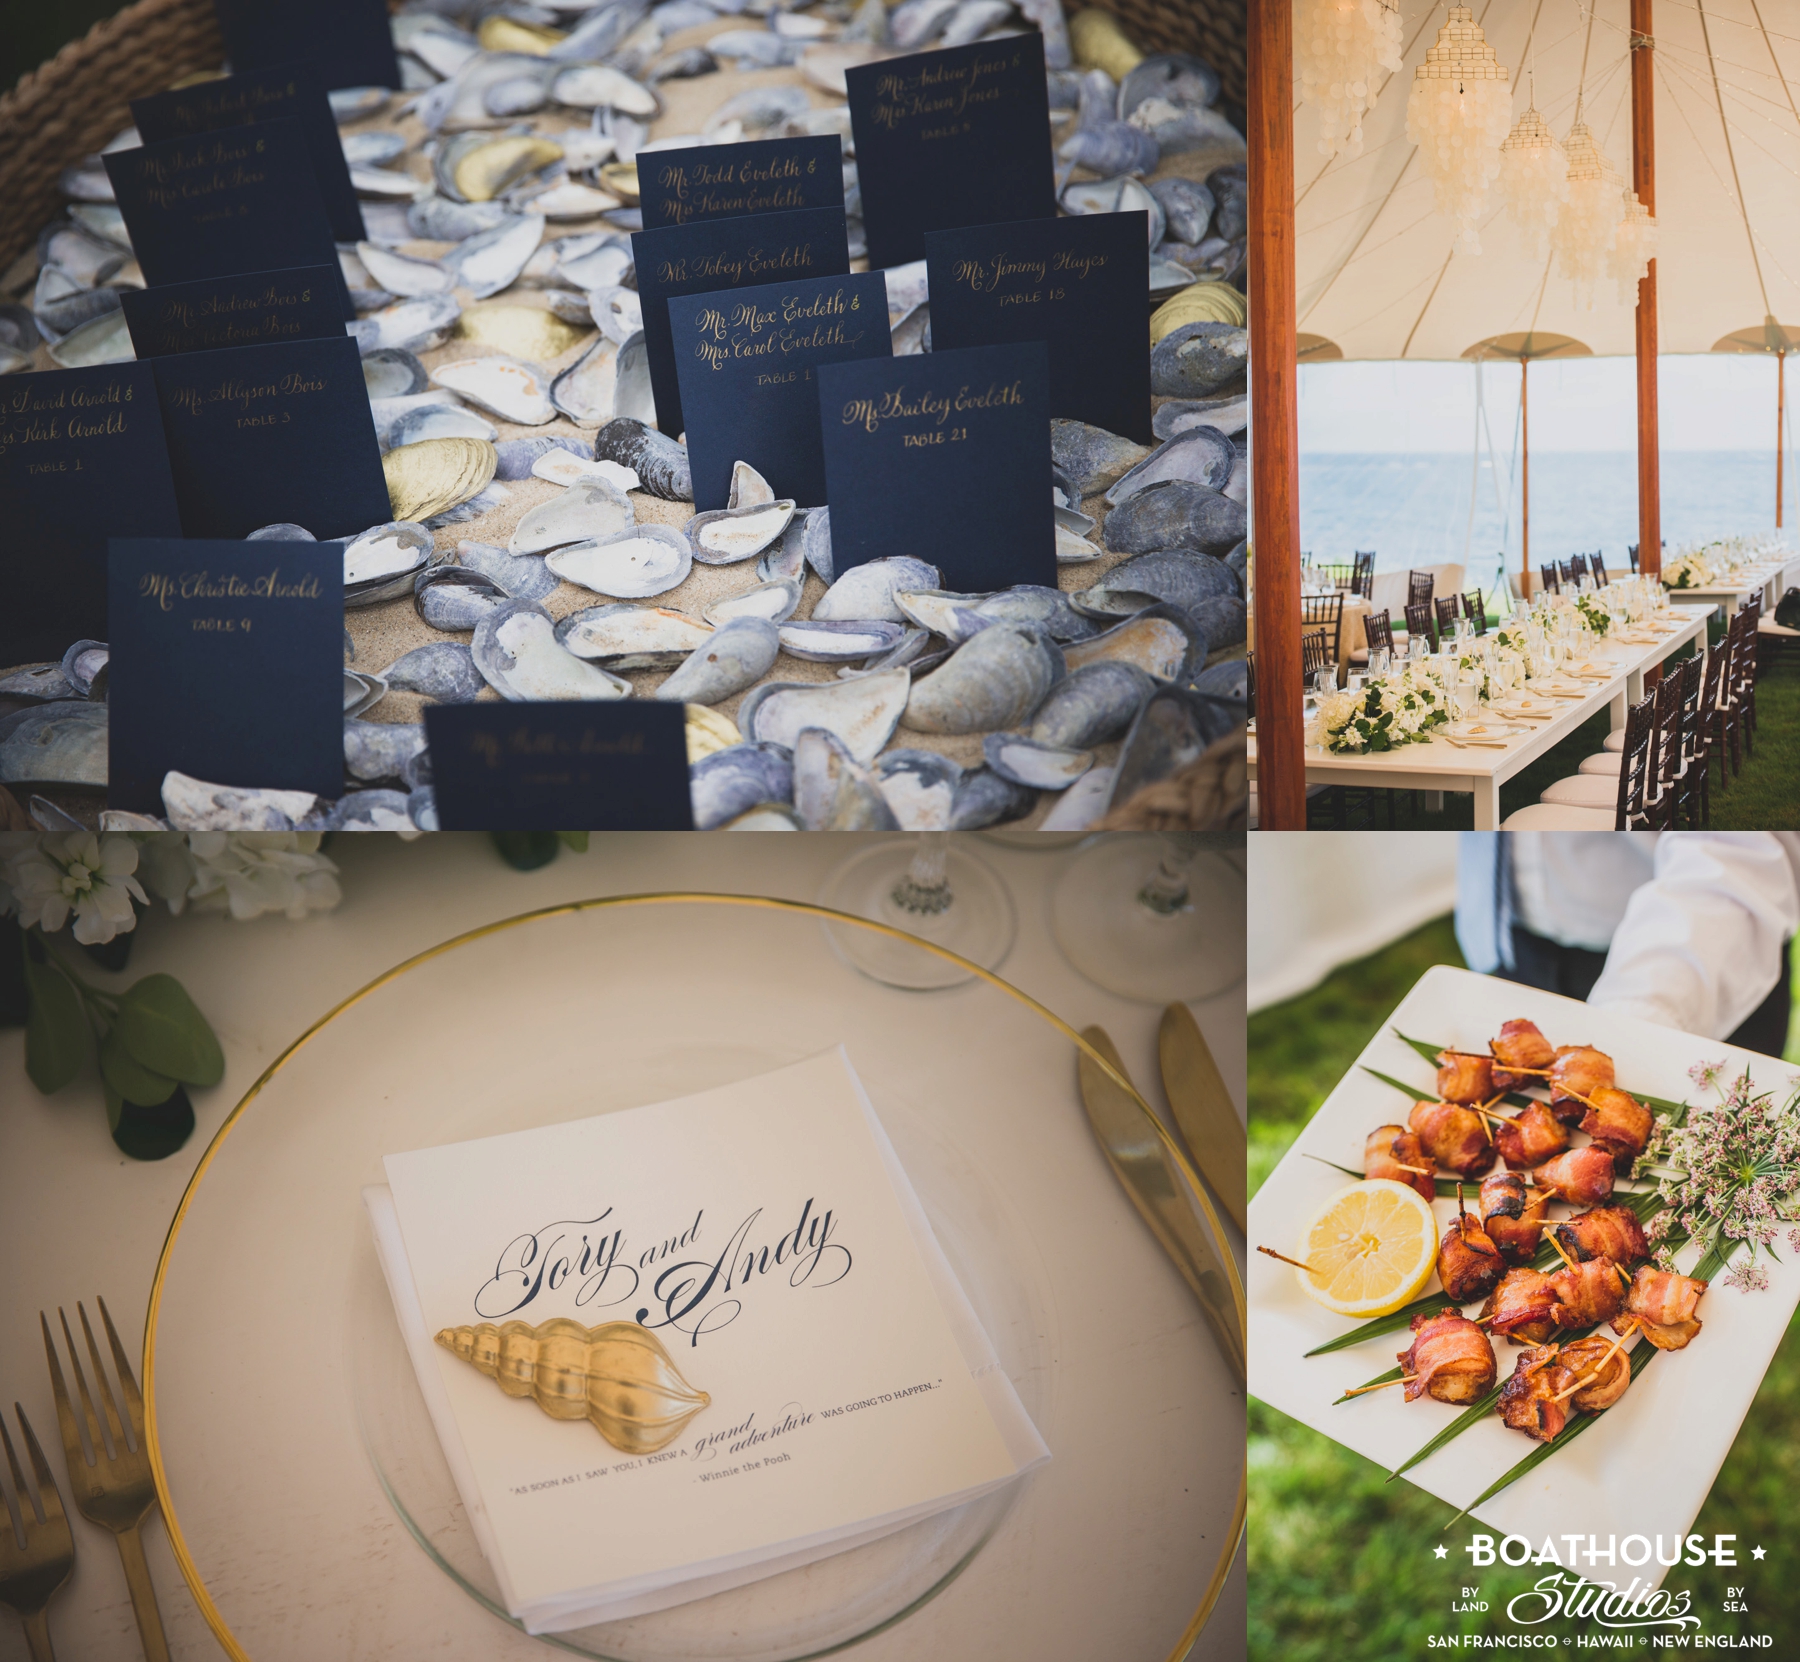 The gold shells on top of the menu. So many layers of neutral colors, subtle textures. It created a warm, elegant and absolutely stunning reception environment.